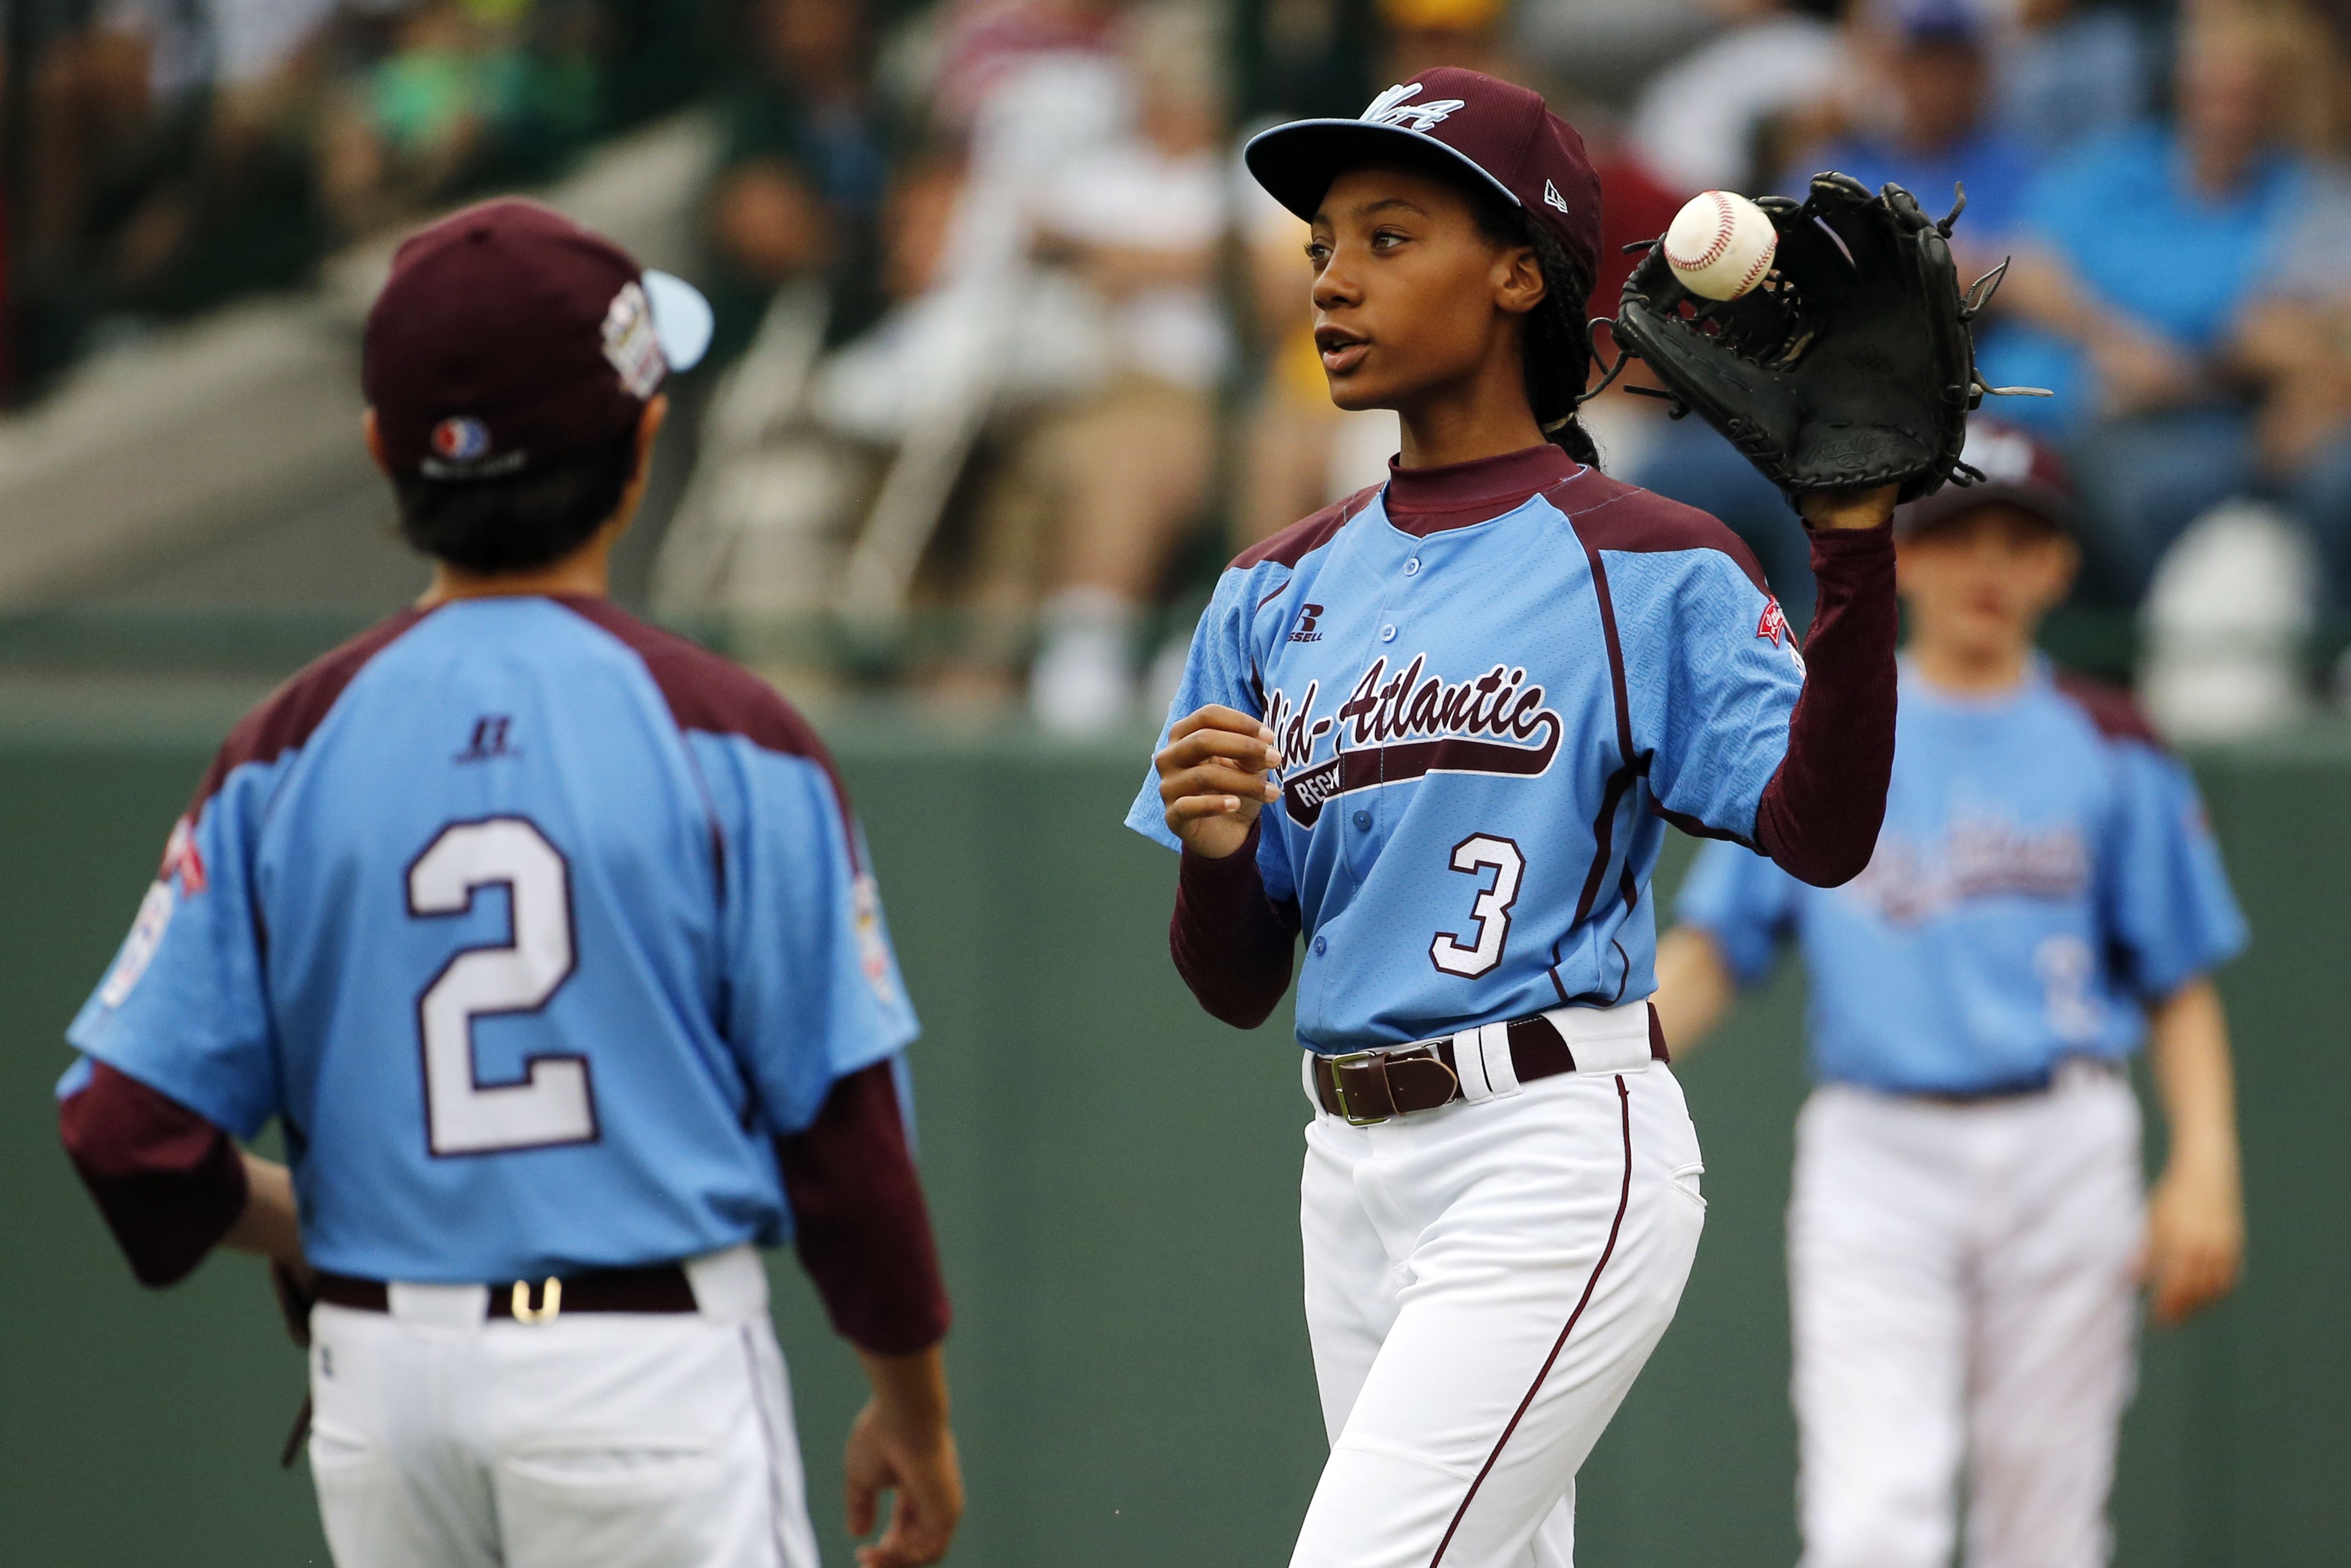 Mo'ne Davis was a transcending figure at just 13 years old